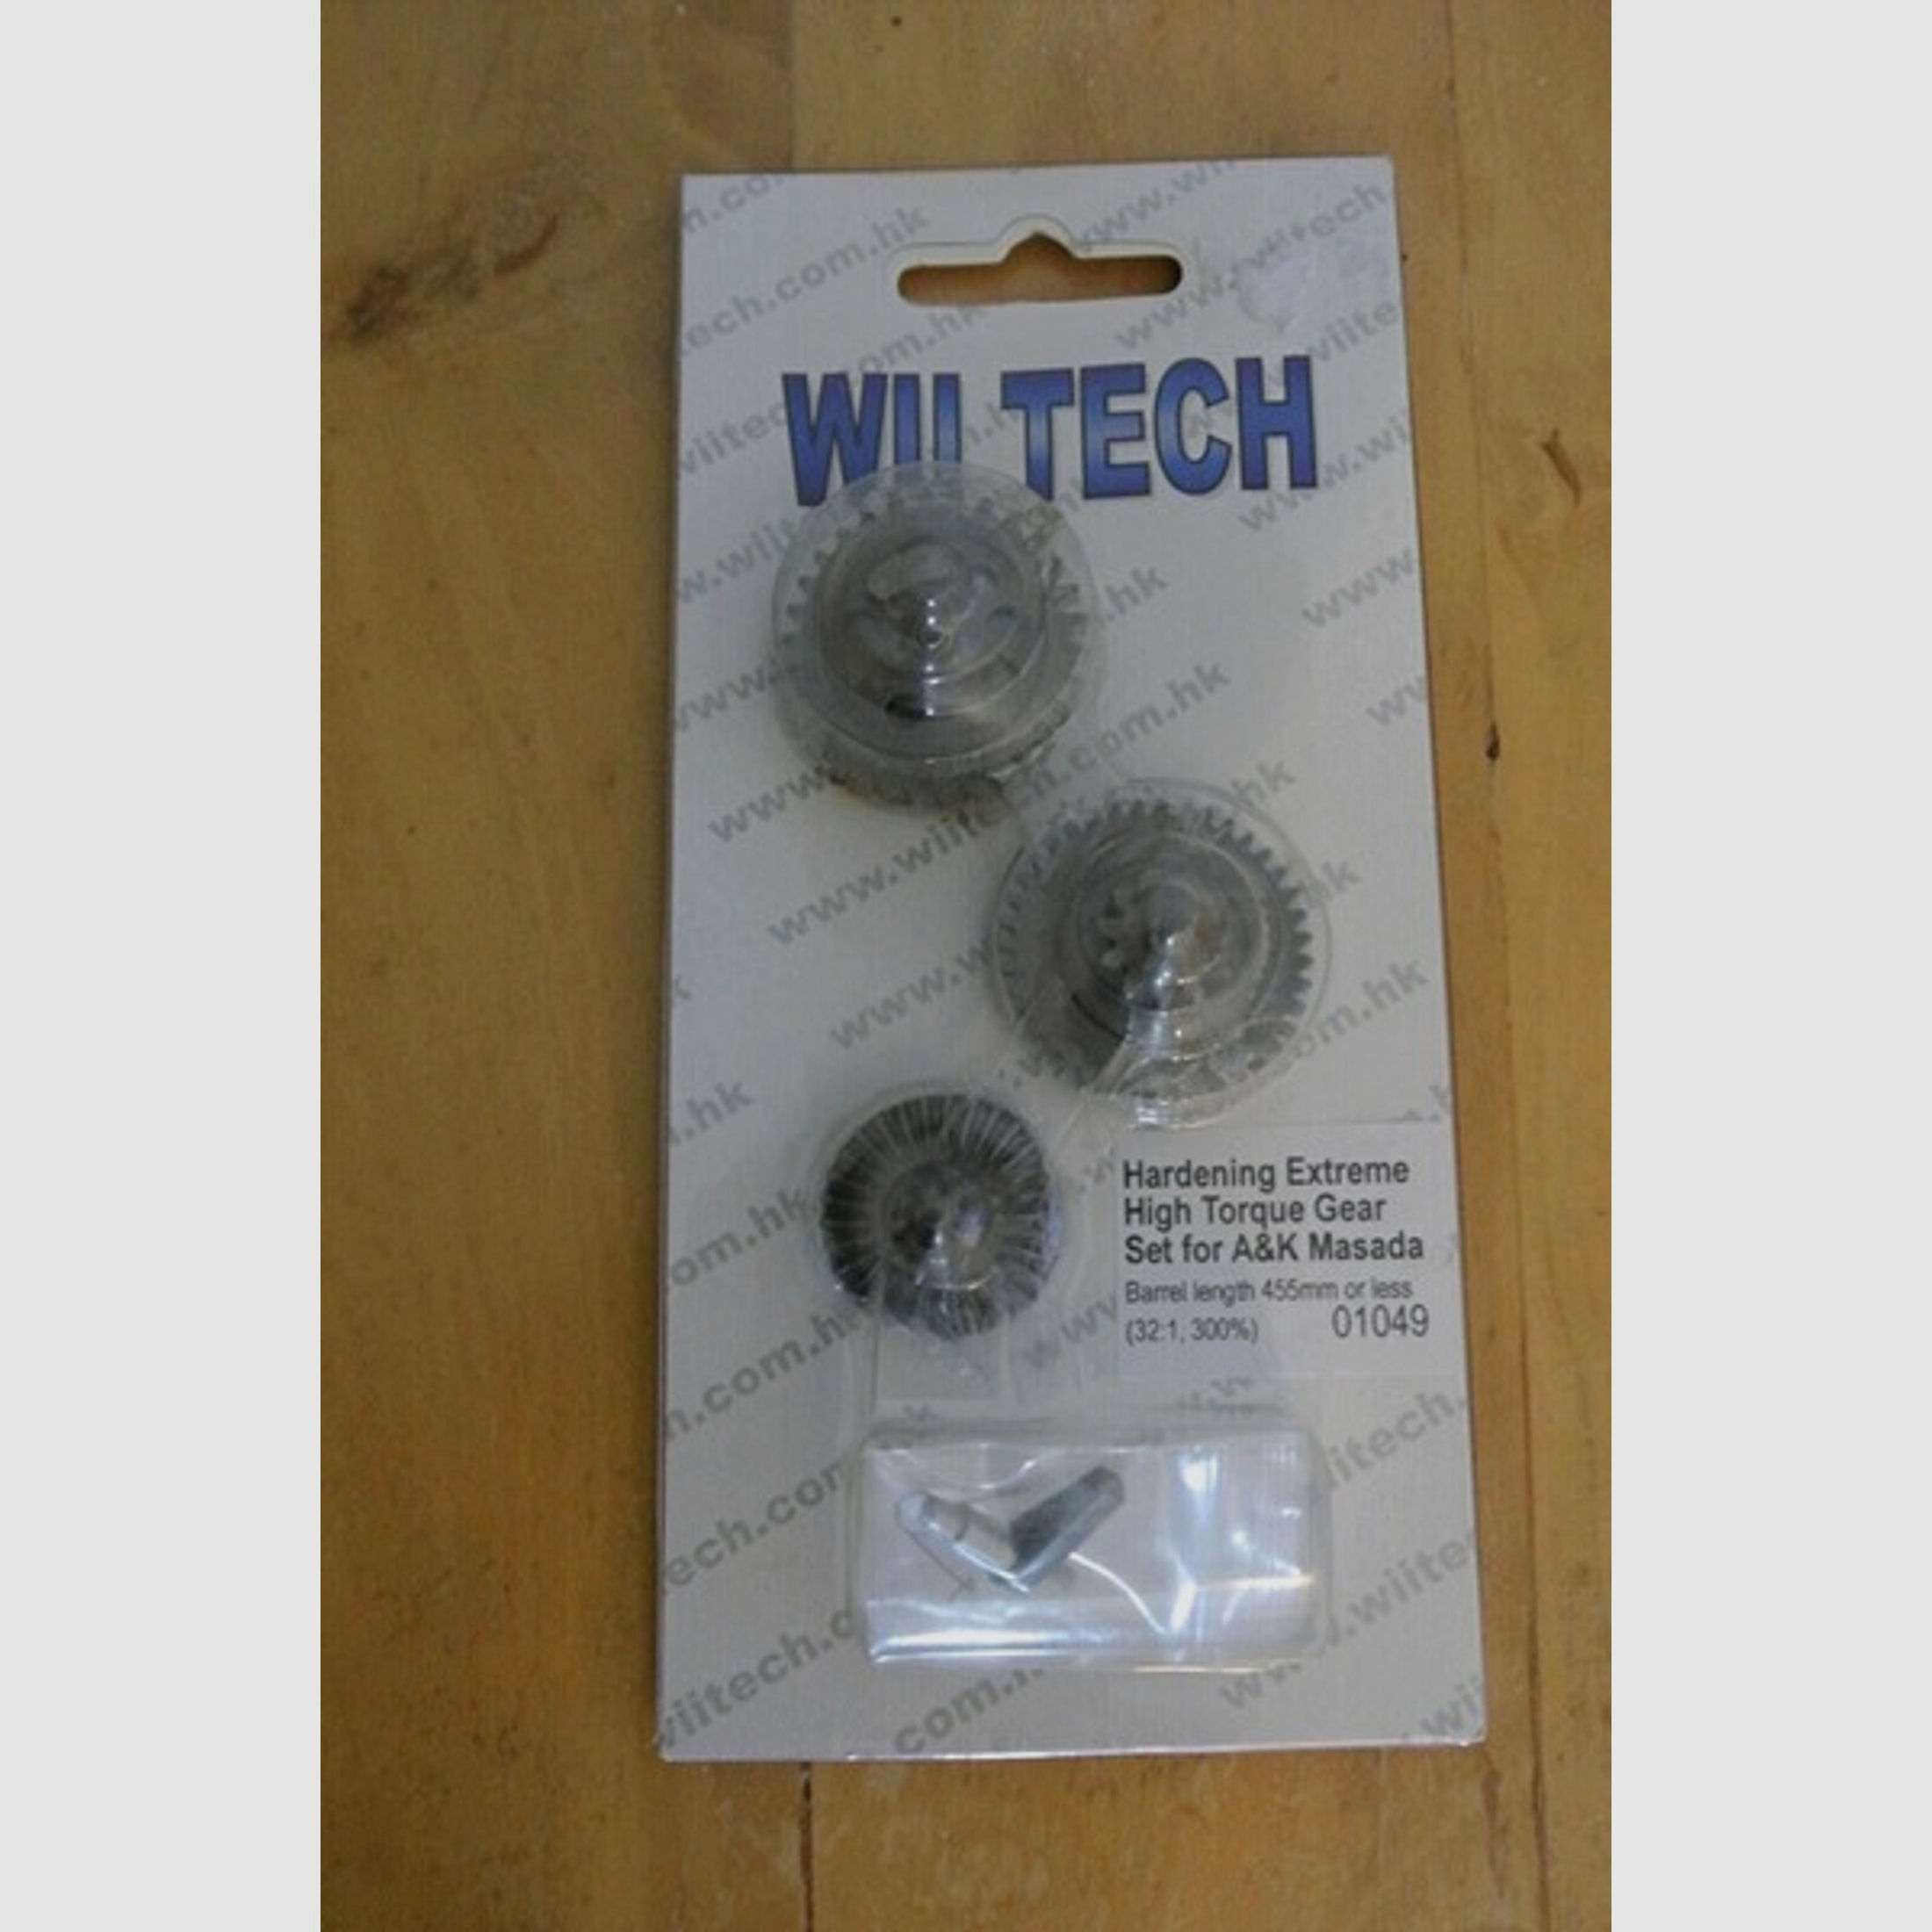 Wii Tech Hardening Extreme High Torque Gear Set for A&K Masada Airsoft Gearbox